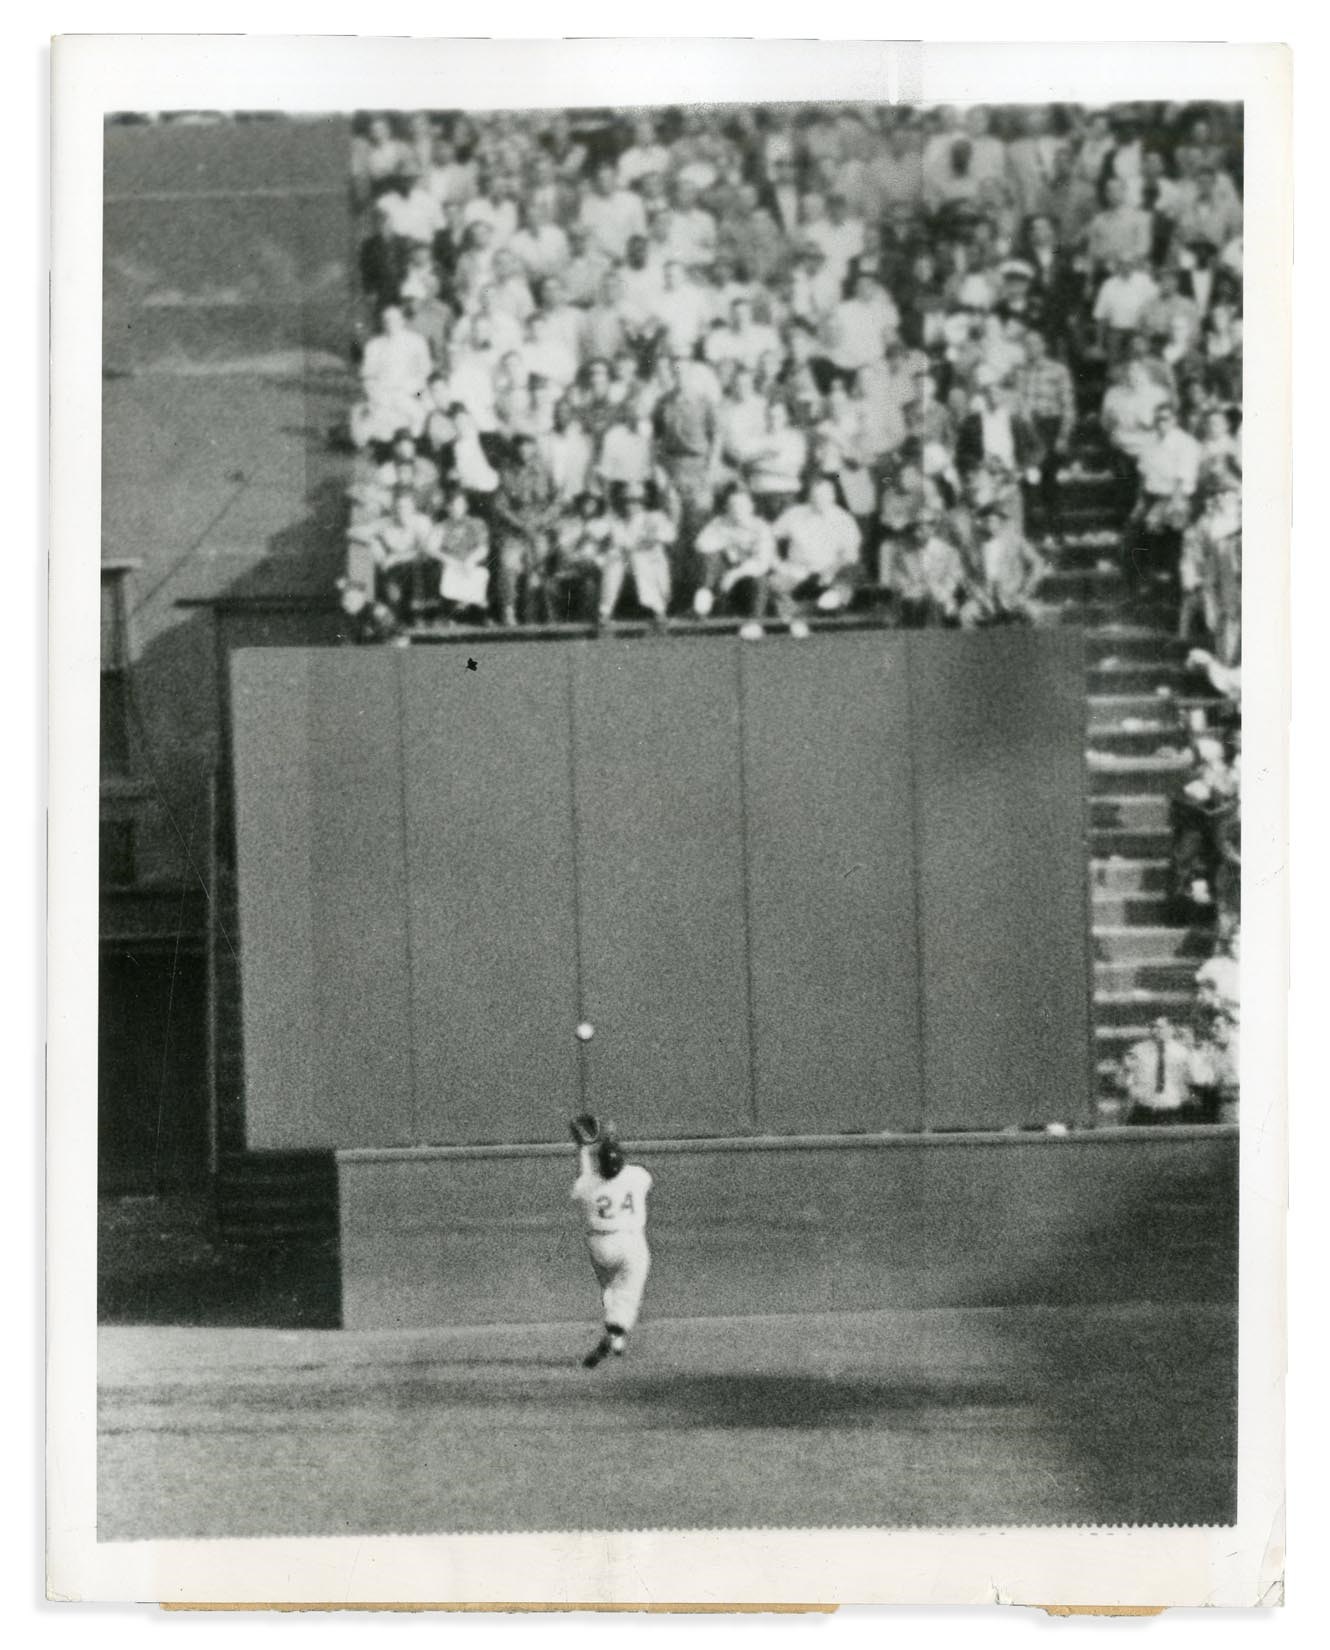 - The Definitive Willie Mays "The Catch" Photo (Type 1)